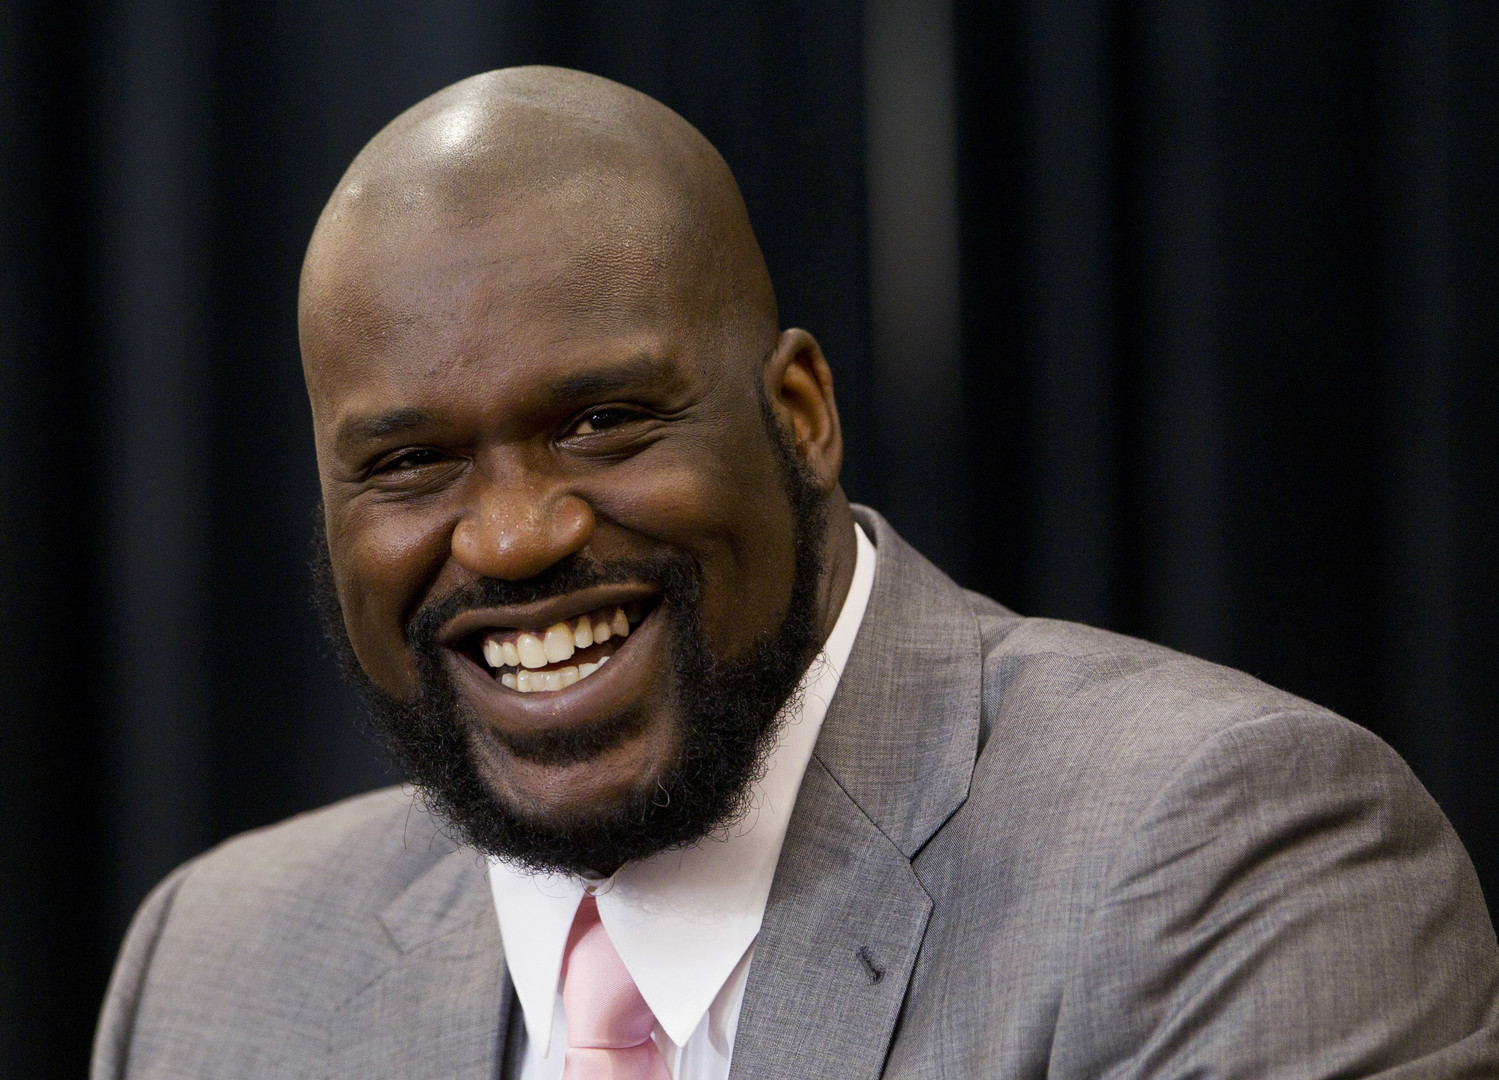 Shaquille O'Neal Says He's Scared For Phoenix Suns' Bad Moment